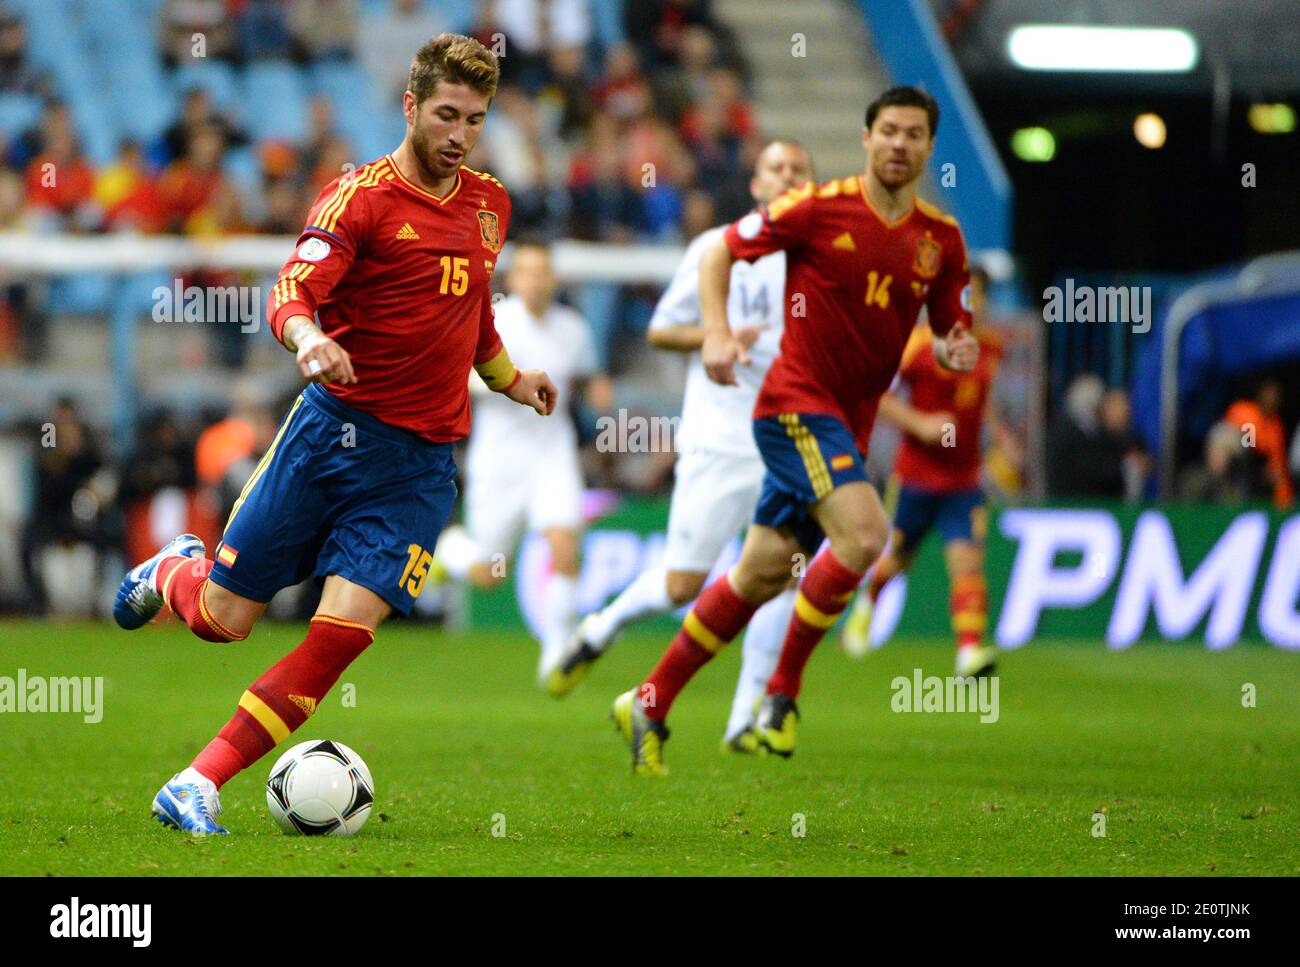 Spain's Sergio Ramos during the World Cup 2014 qualifying soccer match, Spain Vs France at Vicente Calderon stadium in Madrid, Spain on October 16, 2012. Photo by Christian Liewig/ABACAPRESS.COM Stock Photo